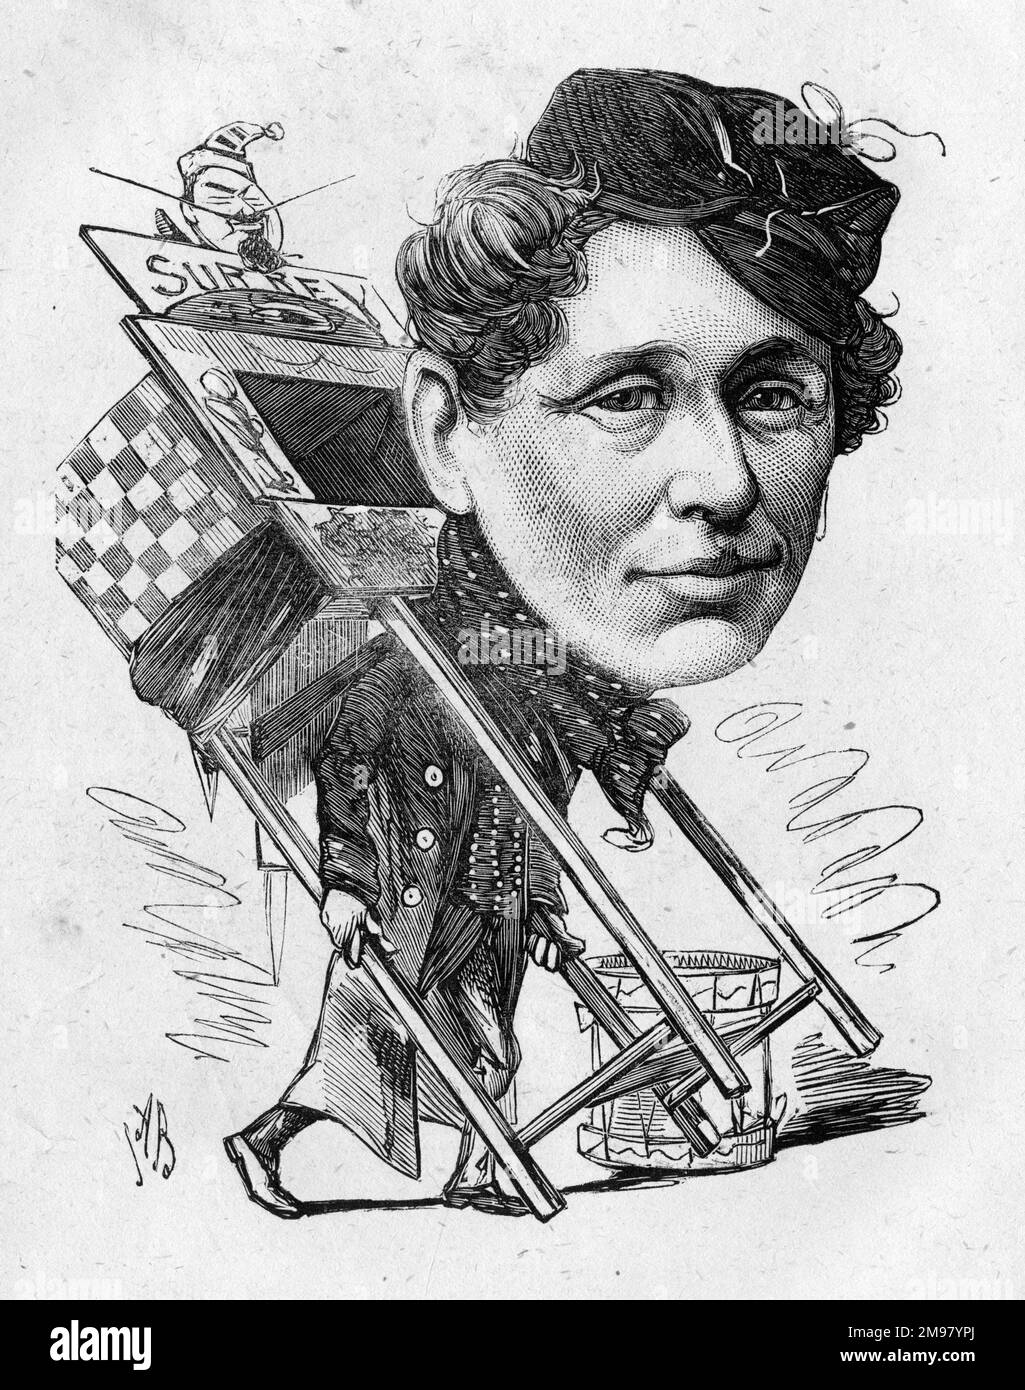 Cartoon of Arthur Williams (1844-1915), English actor, playwright and singer. Seen here carrying a portable version of the Surrey Theatre, London, with the face of its manager, William Holland, at the top. Stock Photo